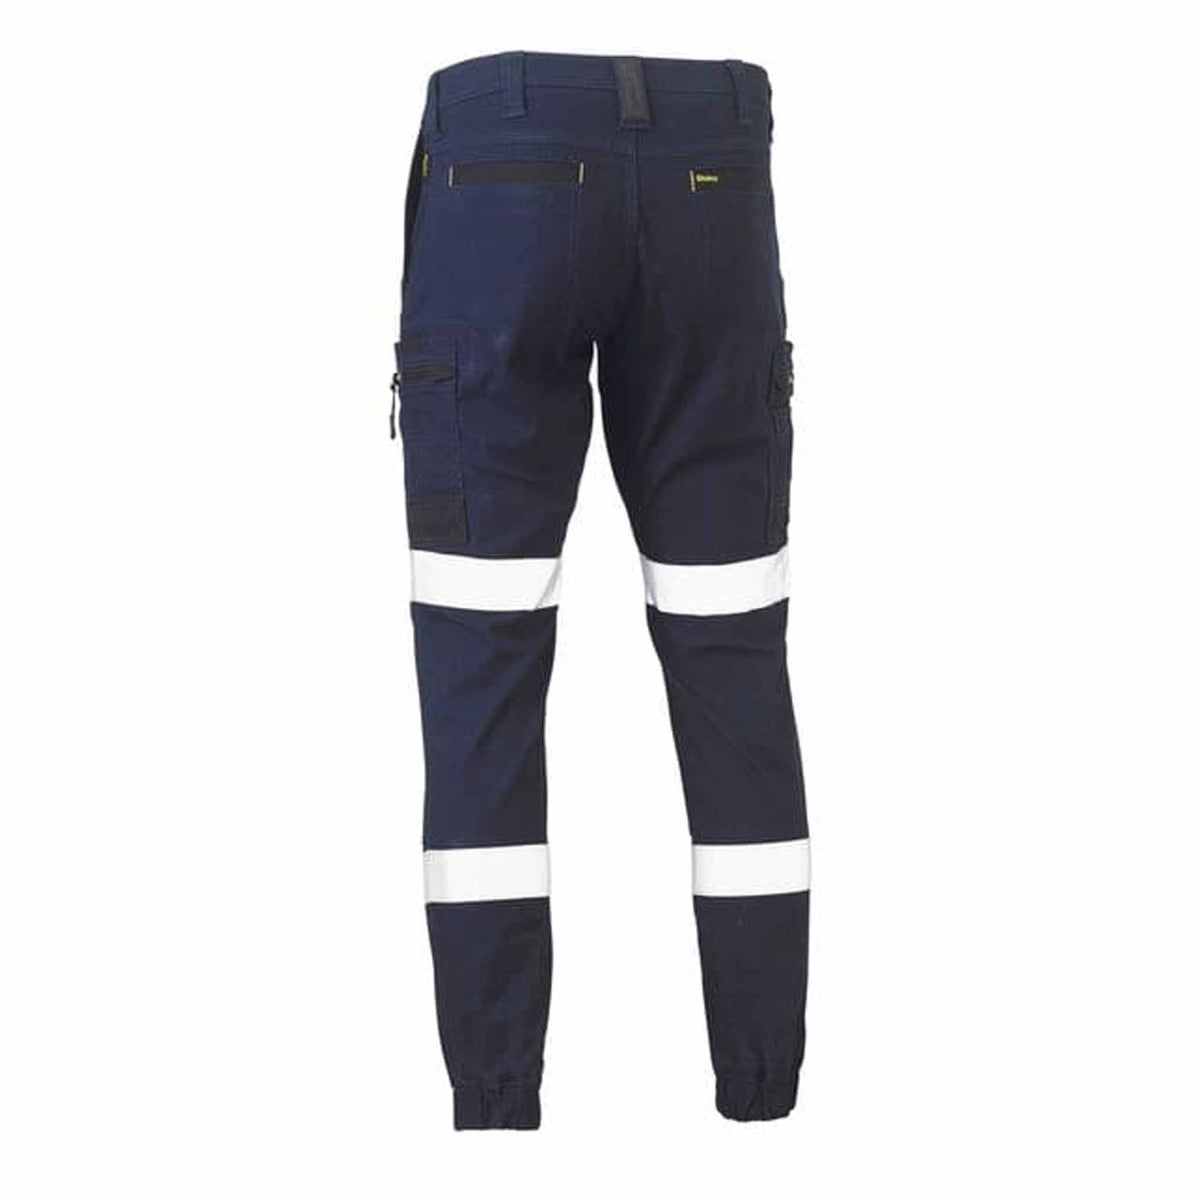 bisley flx and move taped stretch cargo cuffed pants in navy